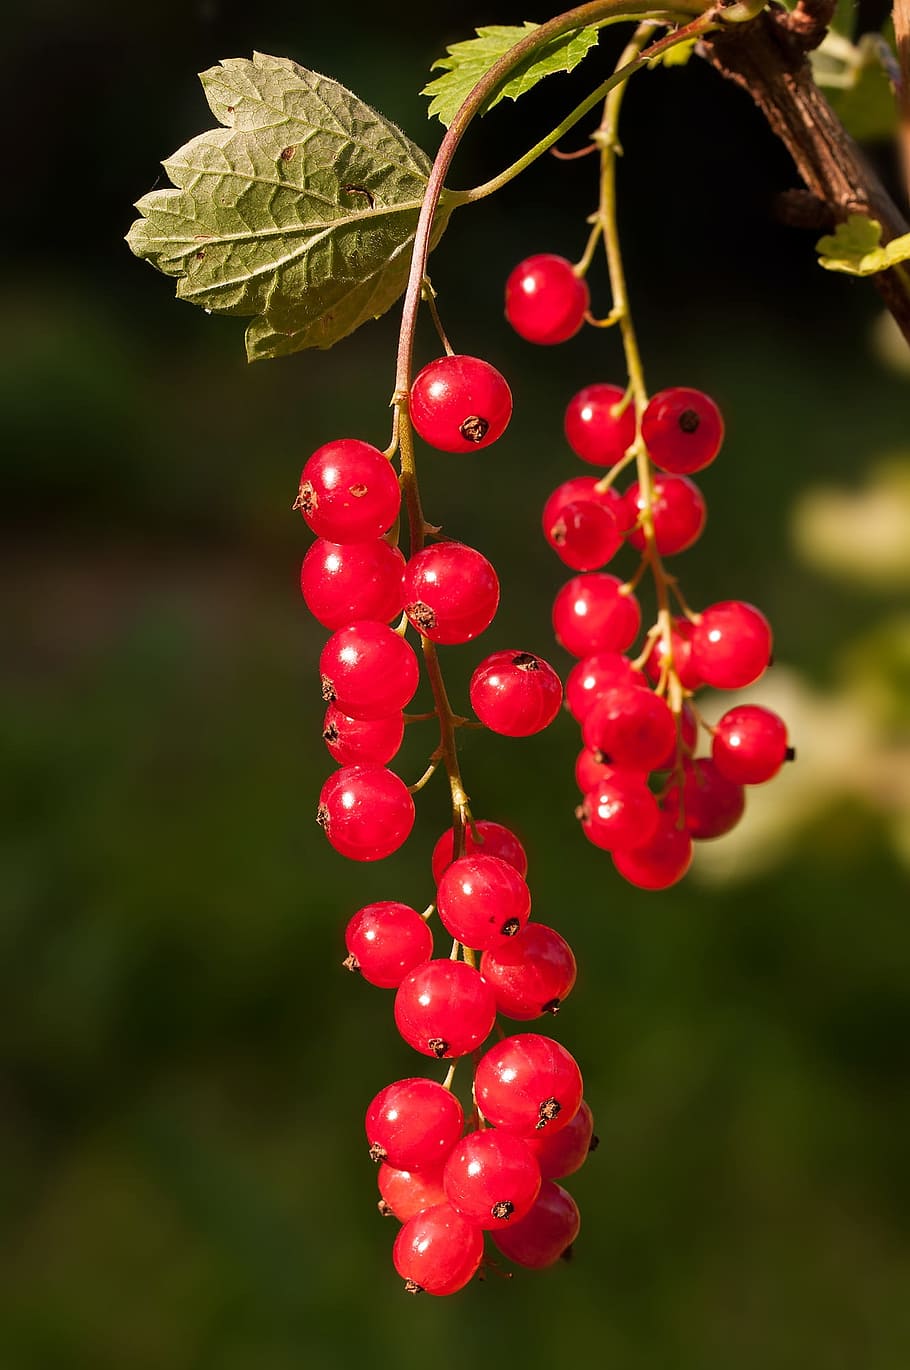 red cherries, red currant, currant, red, fruit, berries, soft fruit, plant, garden currant, food